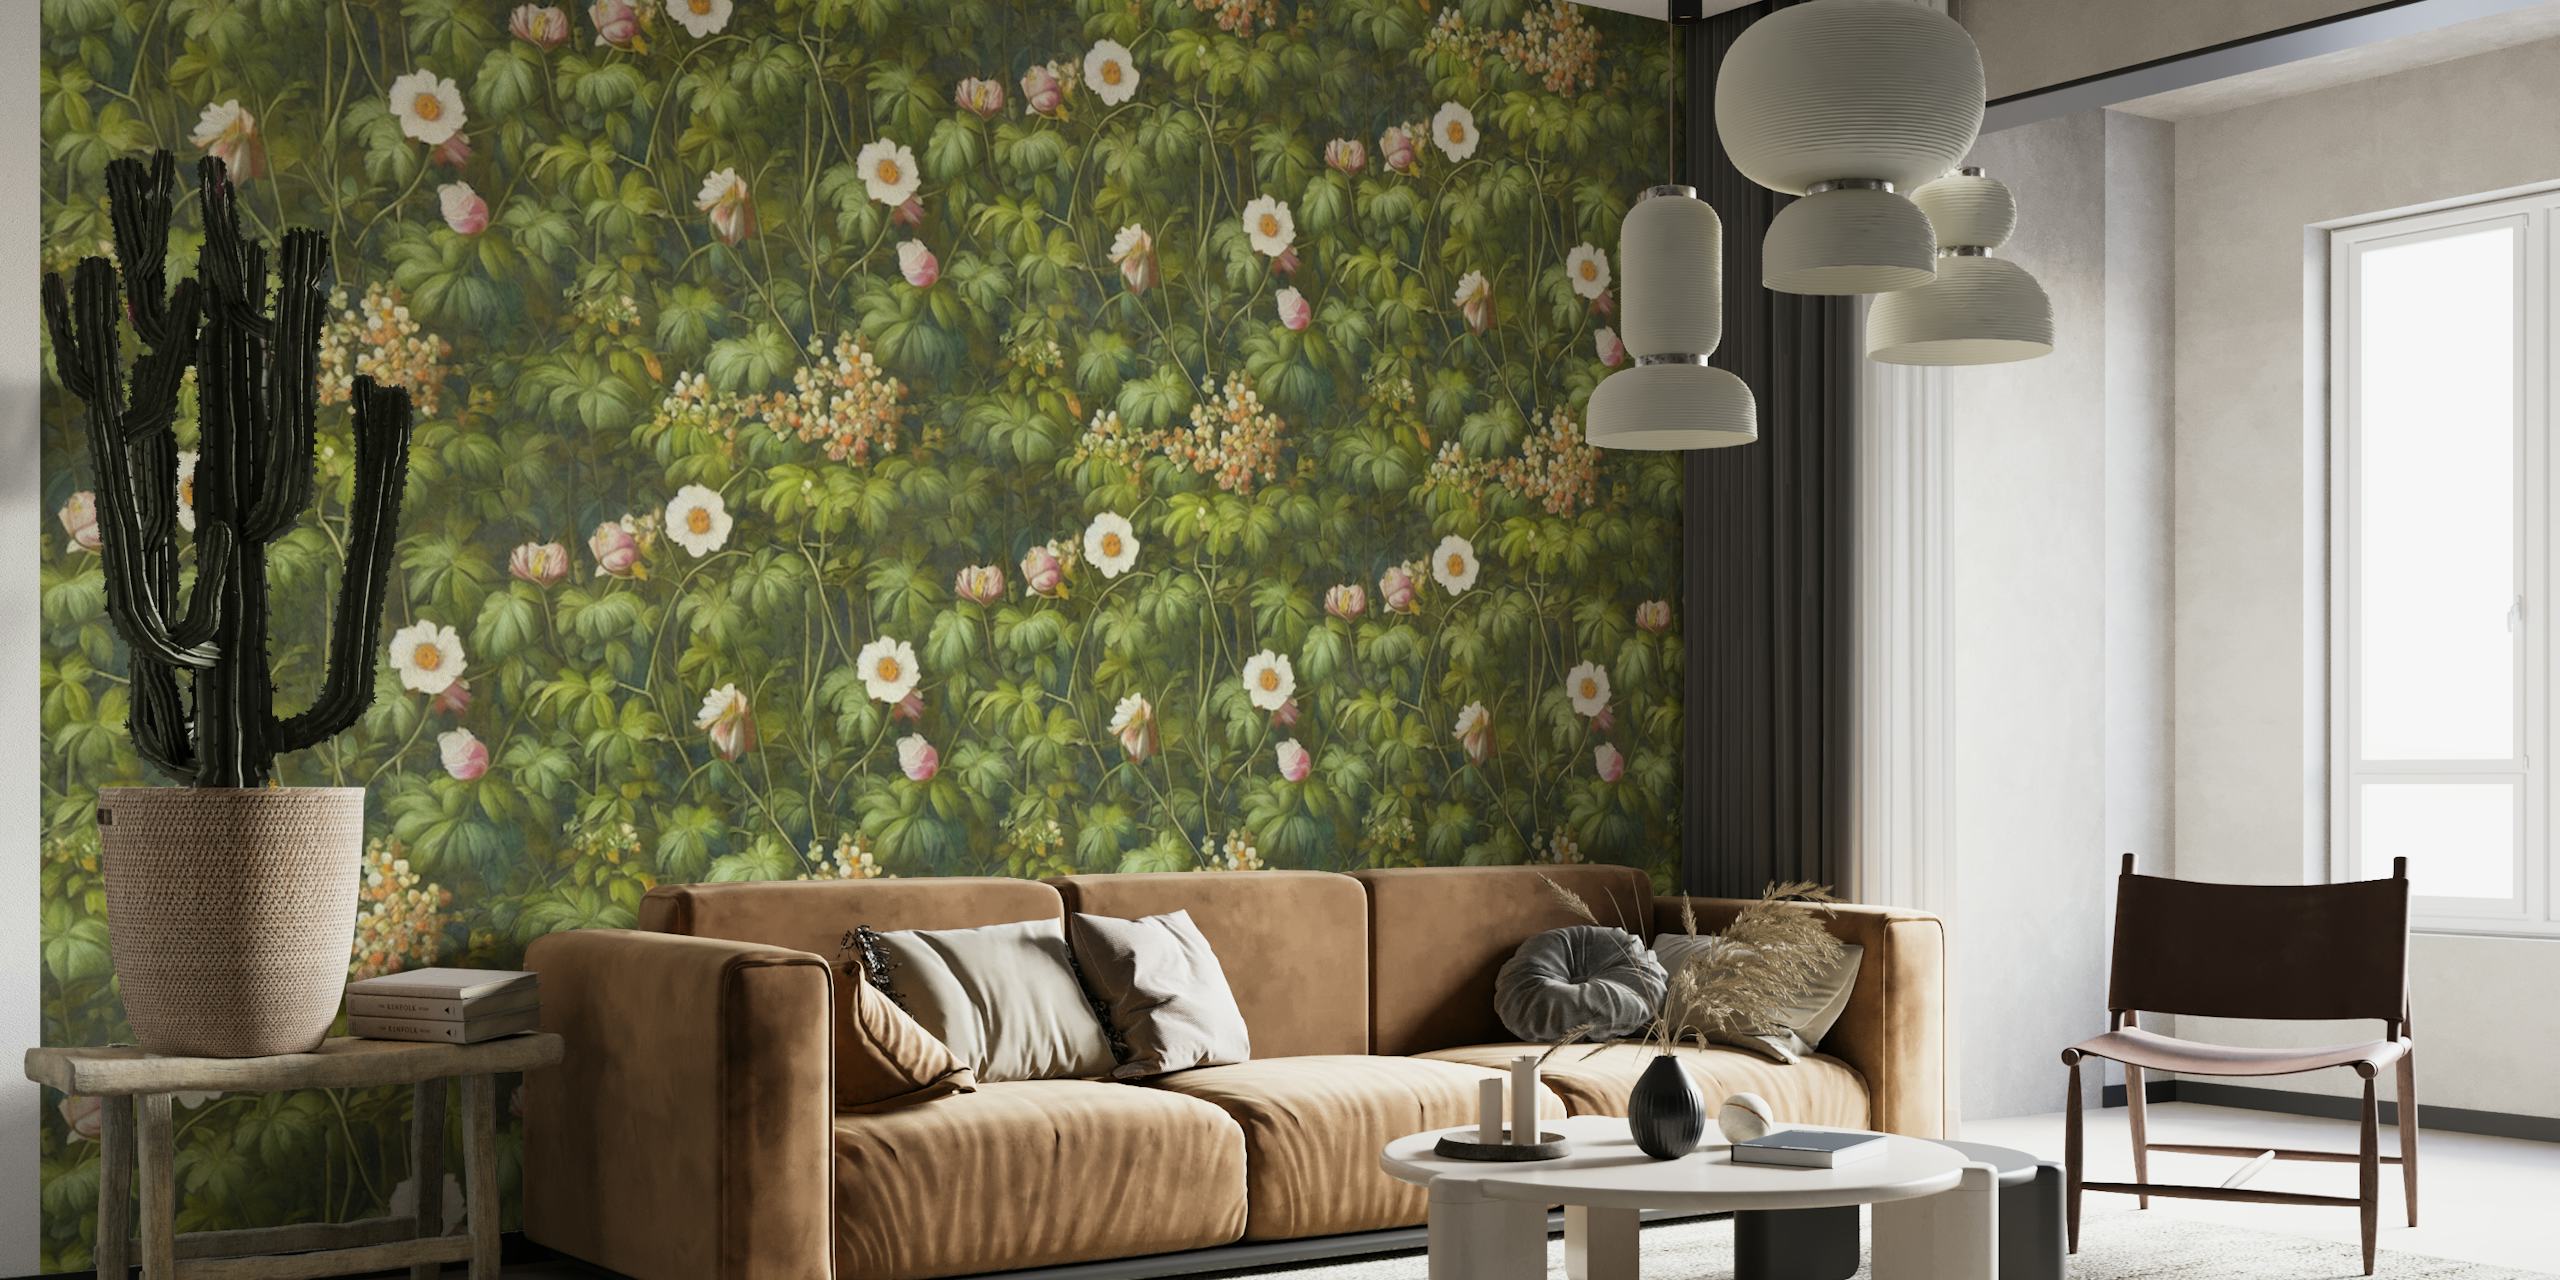 Greenery wall mural with white flowers design